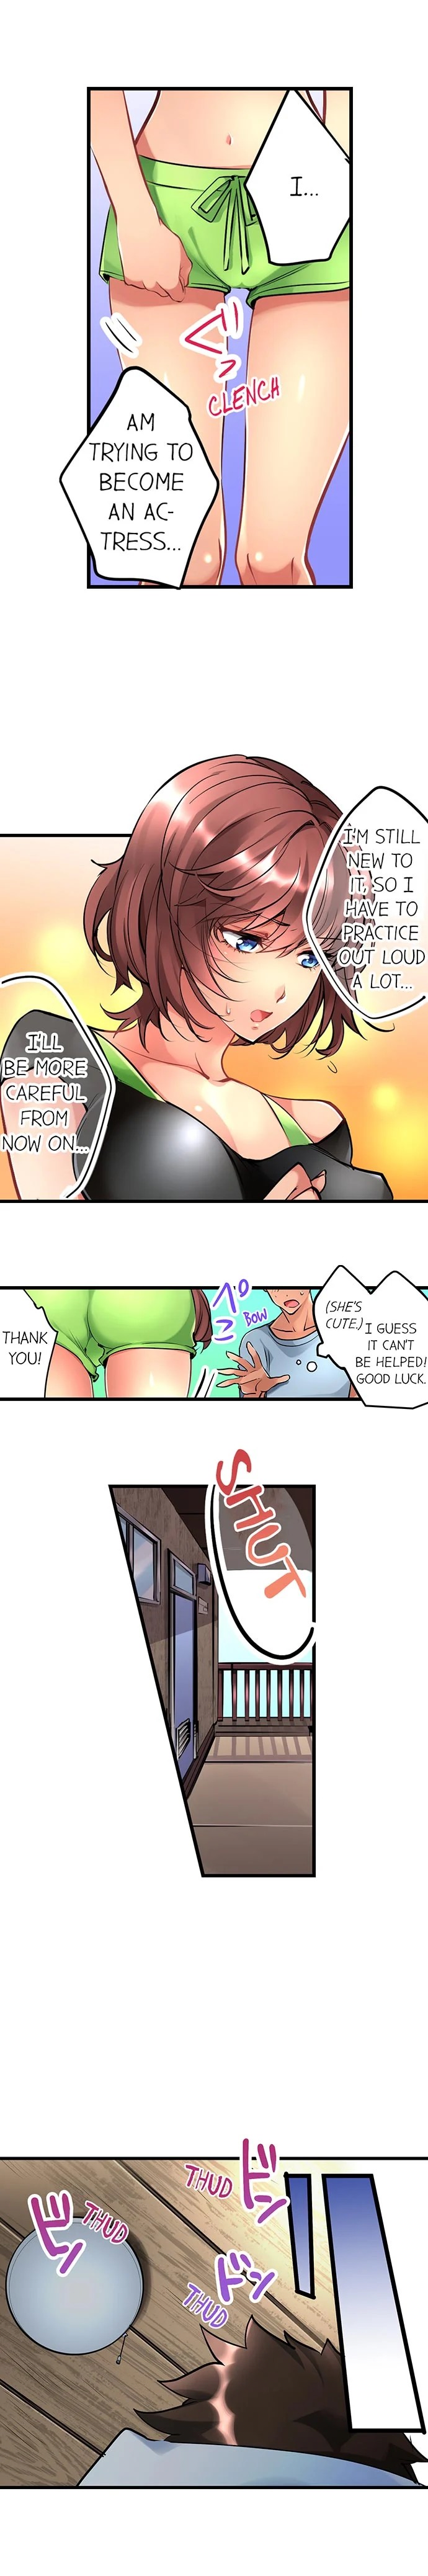 What She Fell On Was The Tip Of My Dick - Chapter 1 Page 6